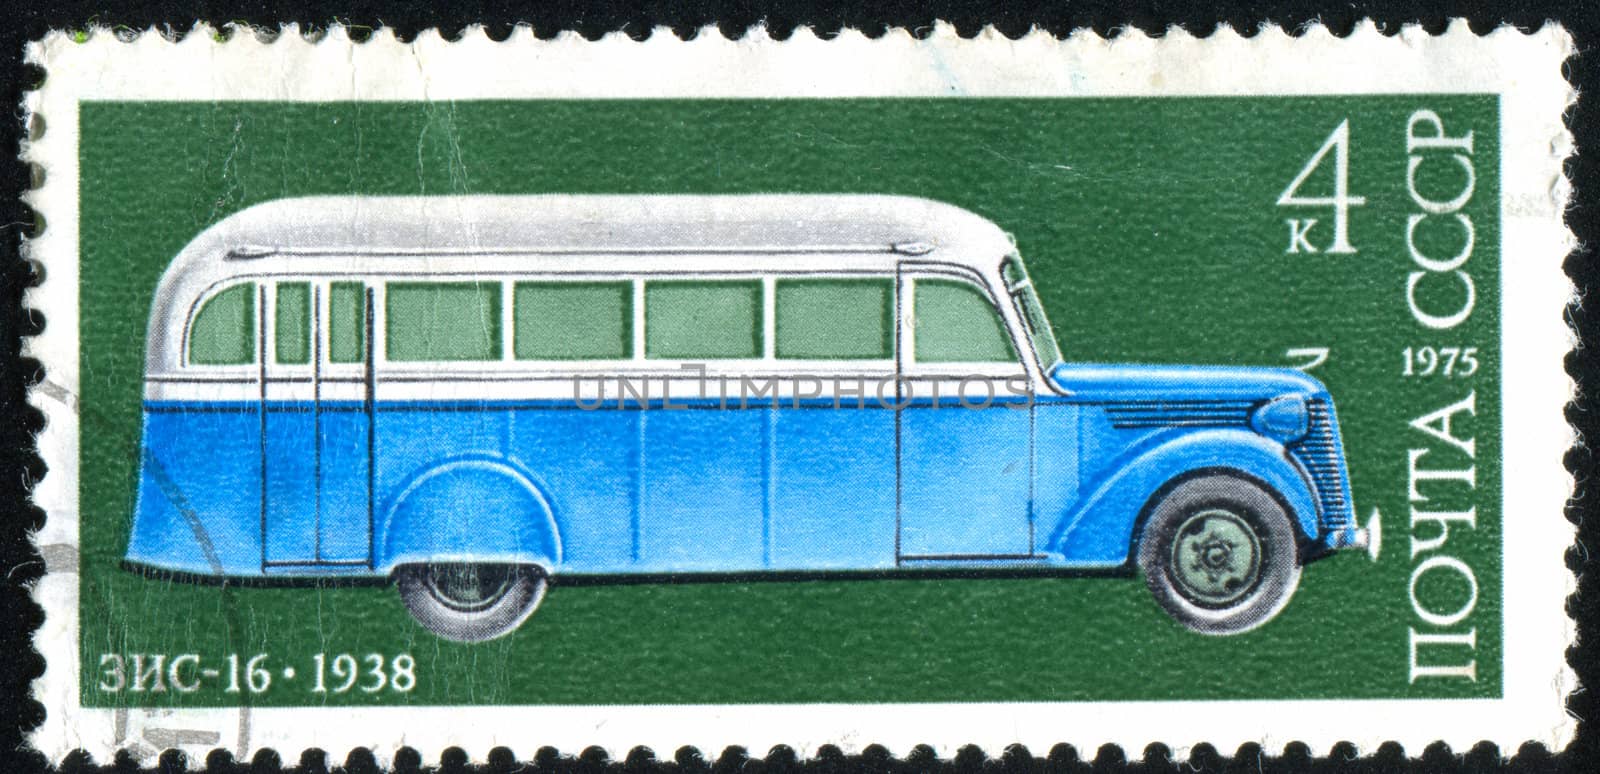 RUSSIA - CIRCA 1975: stamp printed by Russia, shows ancient bus, circa 1975.